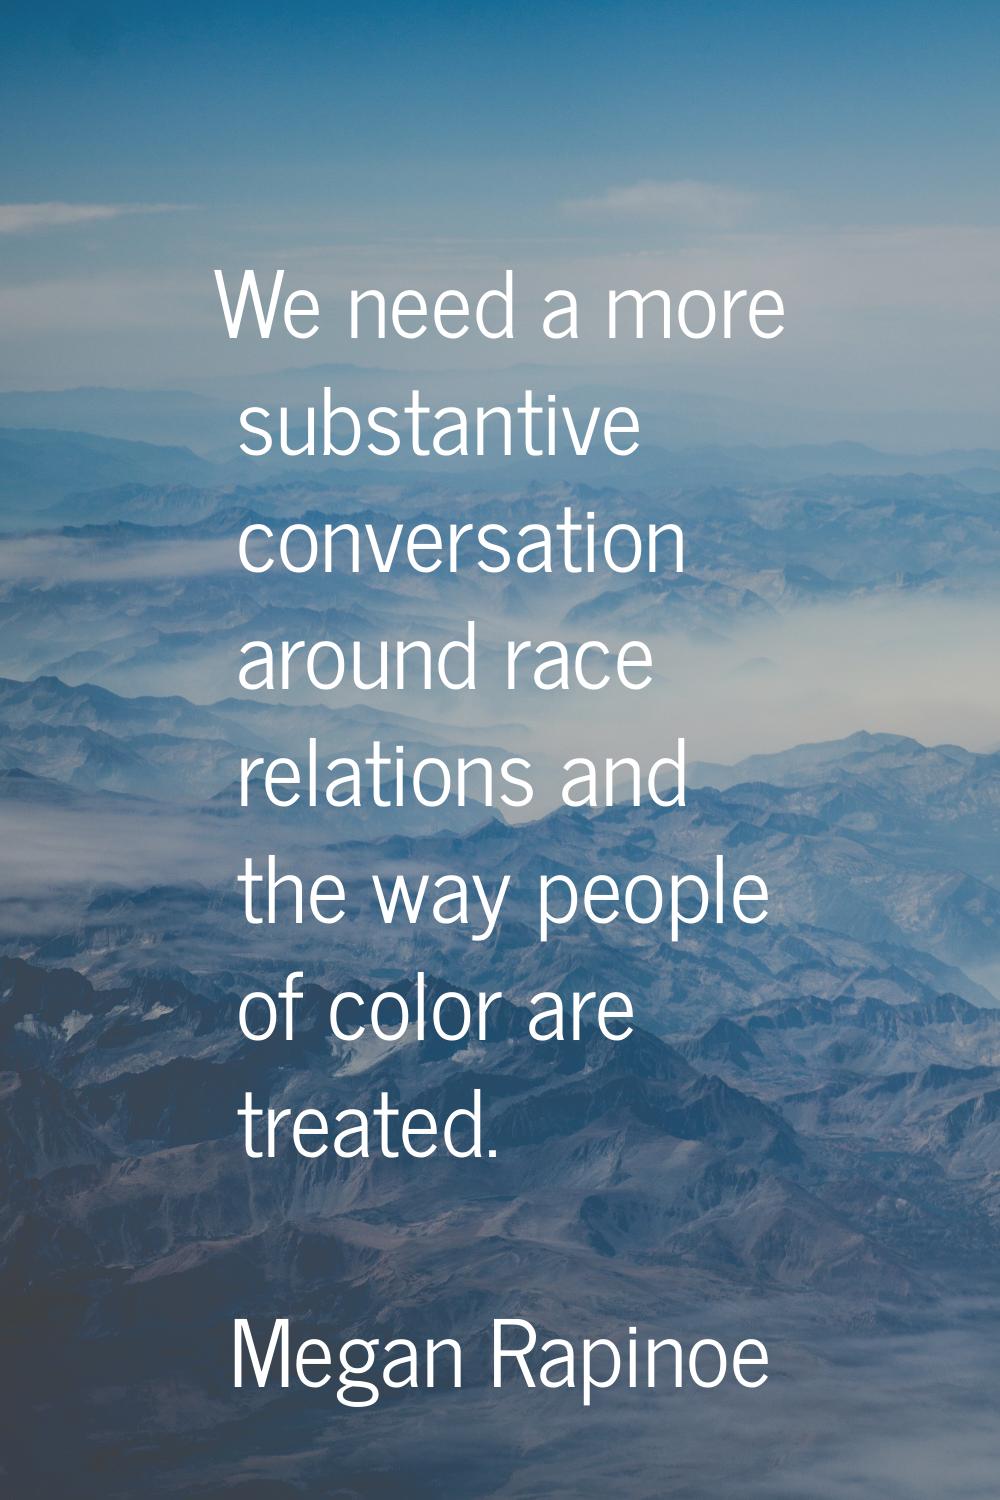 We need a more substantive conversation around race relations and the way people of color are treat